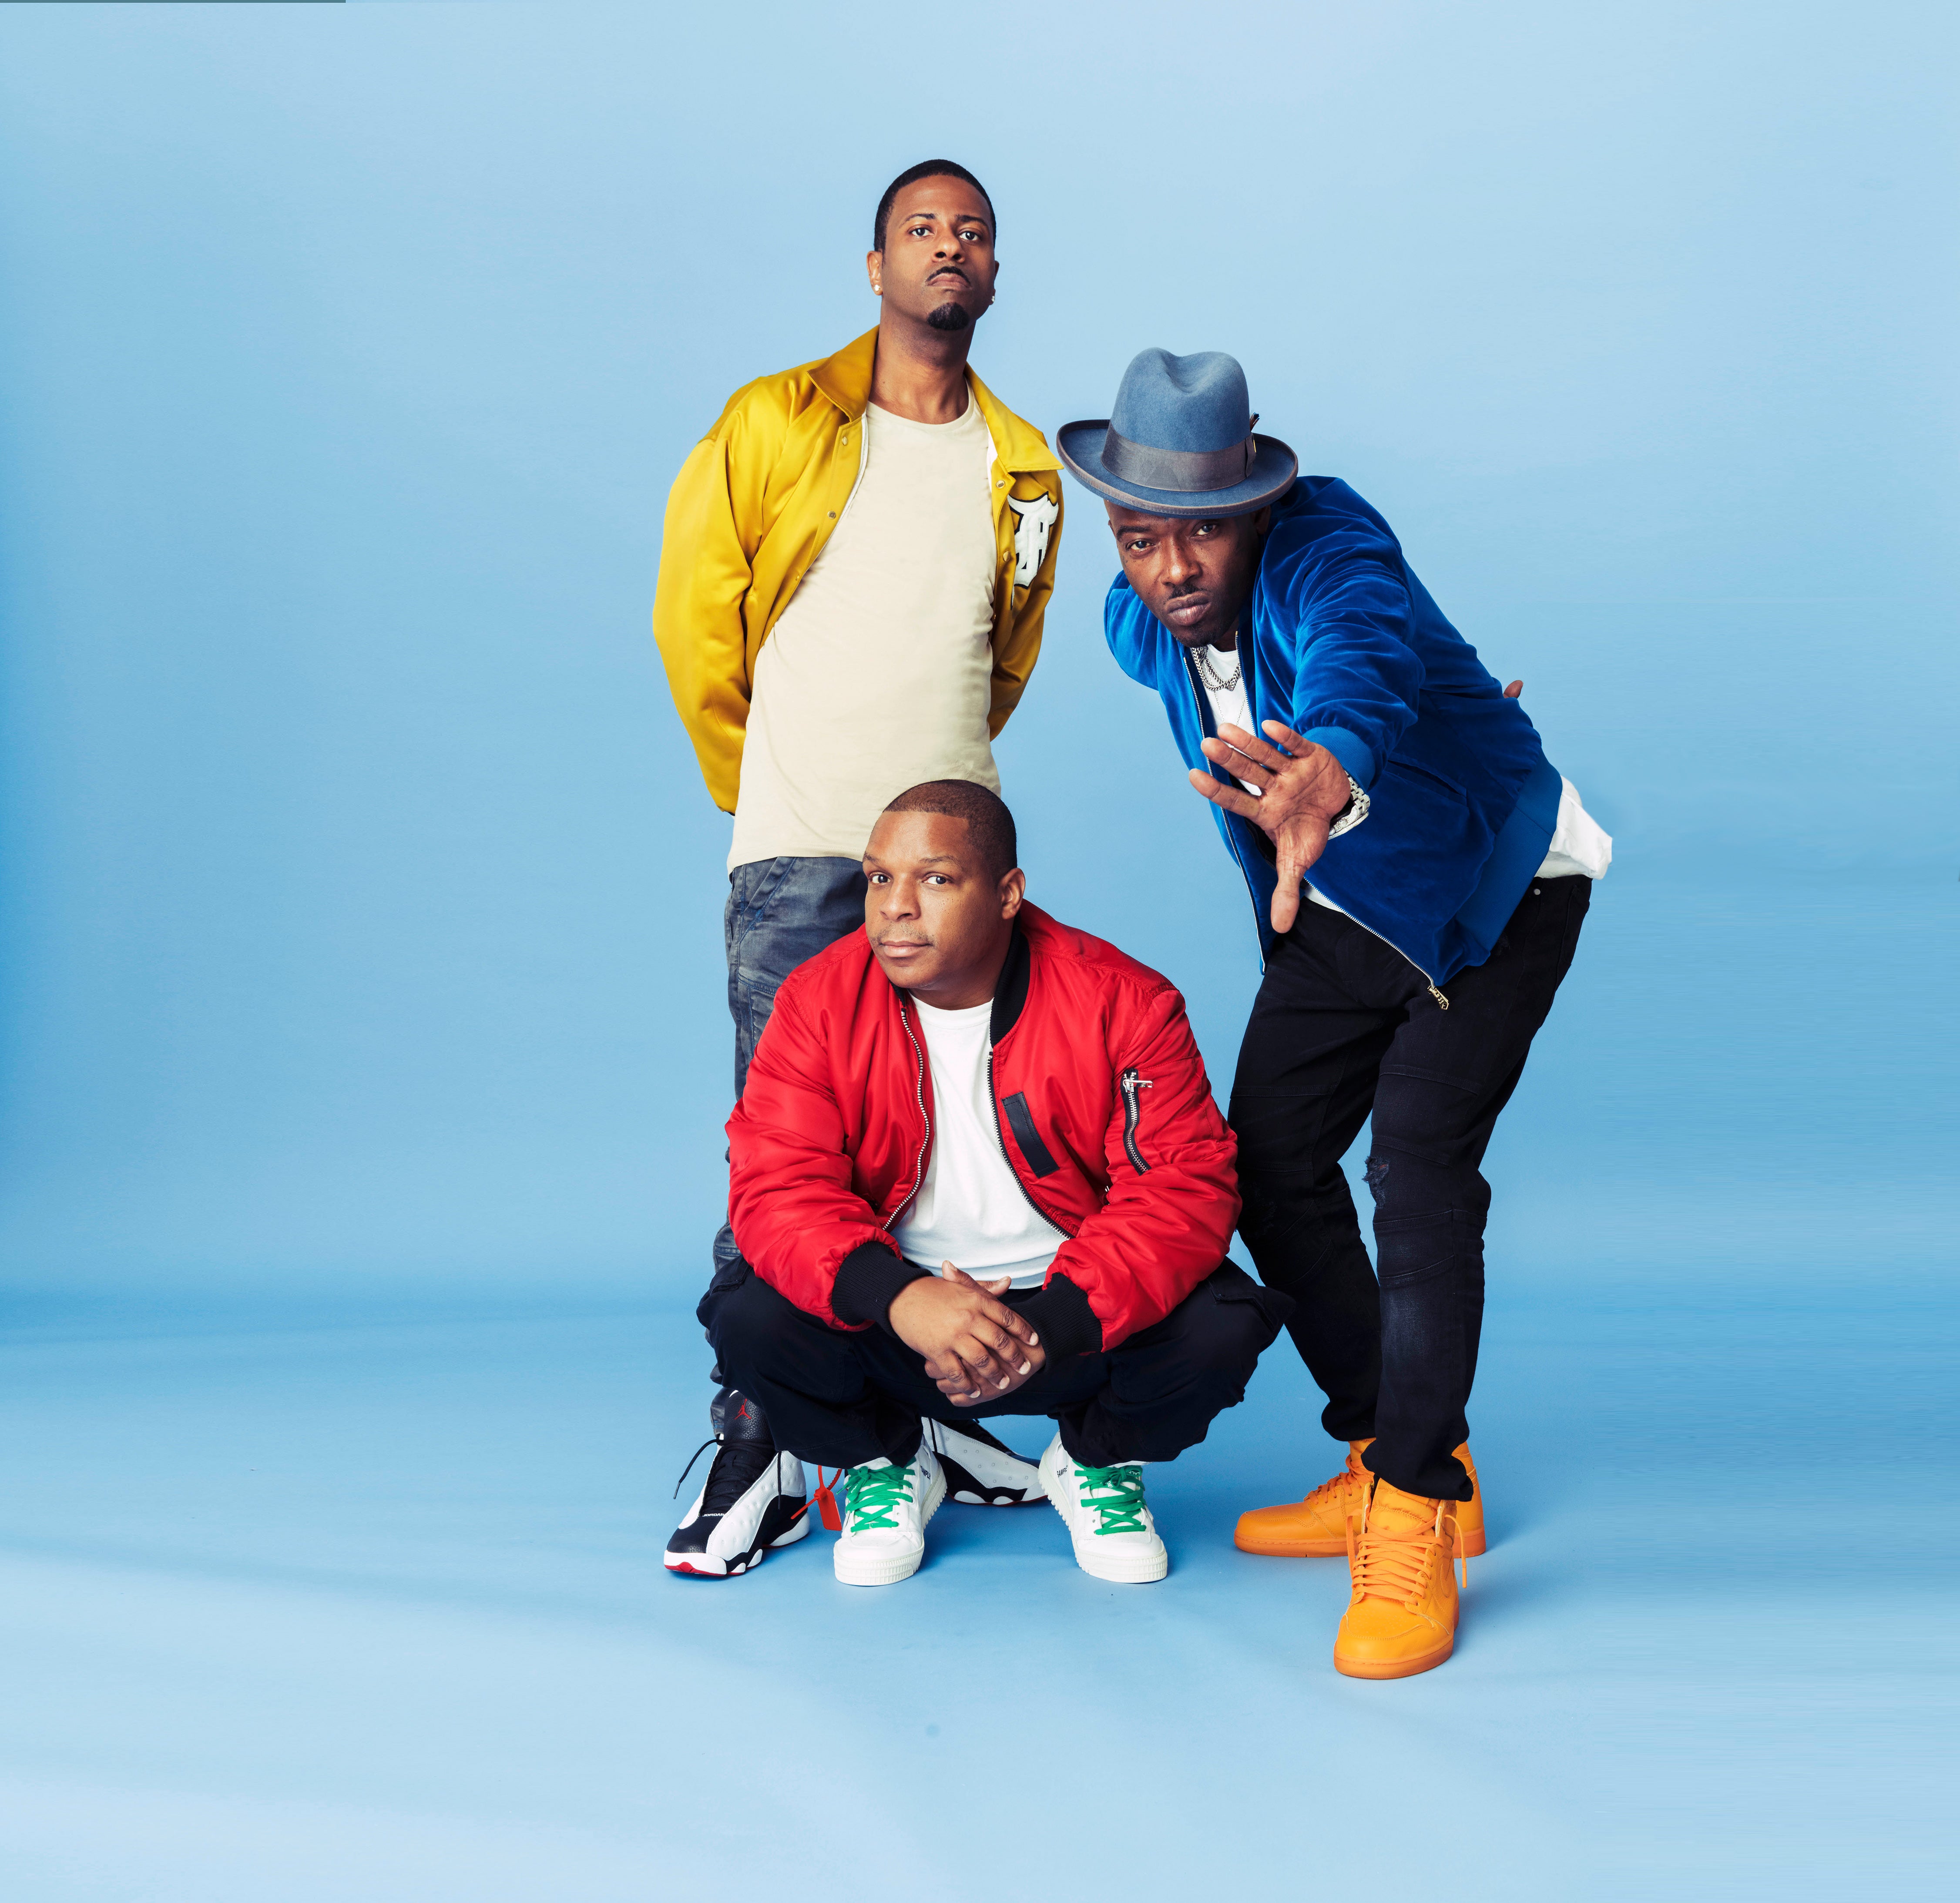 Naughty By Nature in Winnipeg promo photo for Virgin 103 / Club Card presale offer code